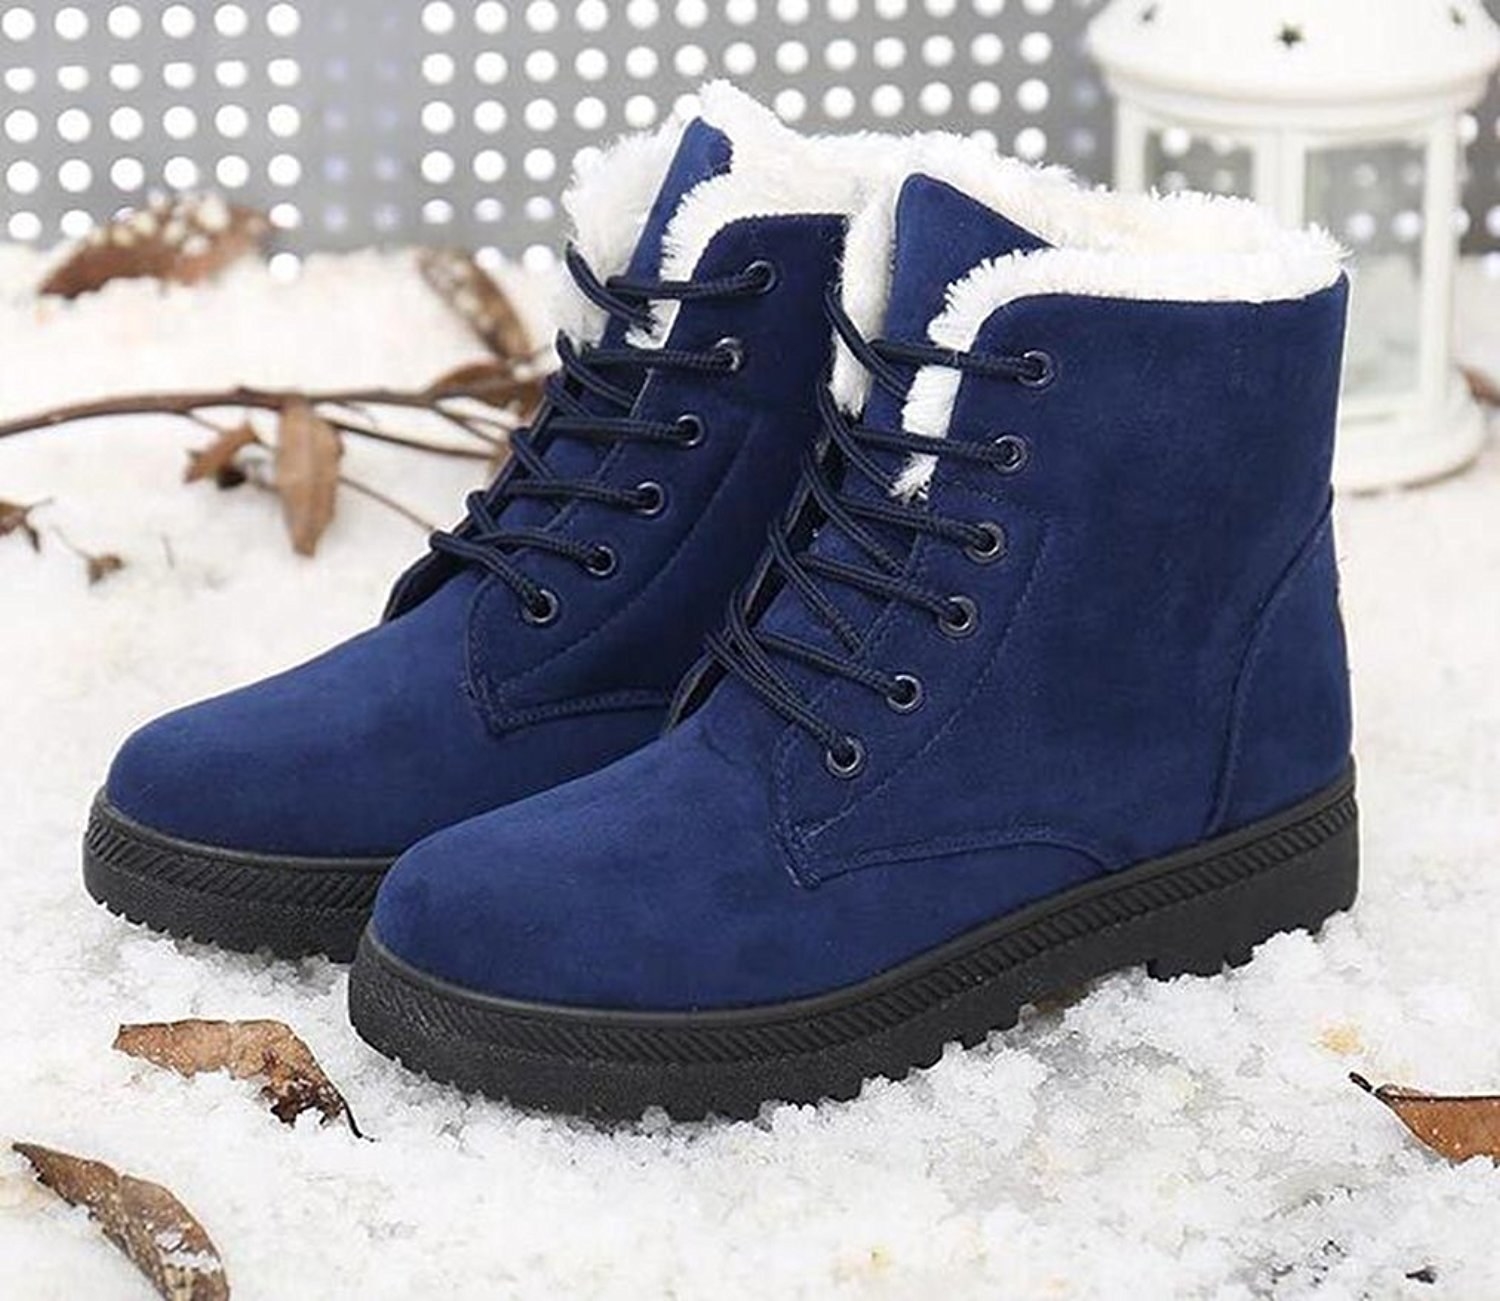 27 Stunning Boots That'll Make You Actually Like Winter